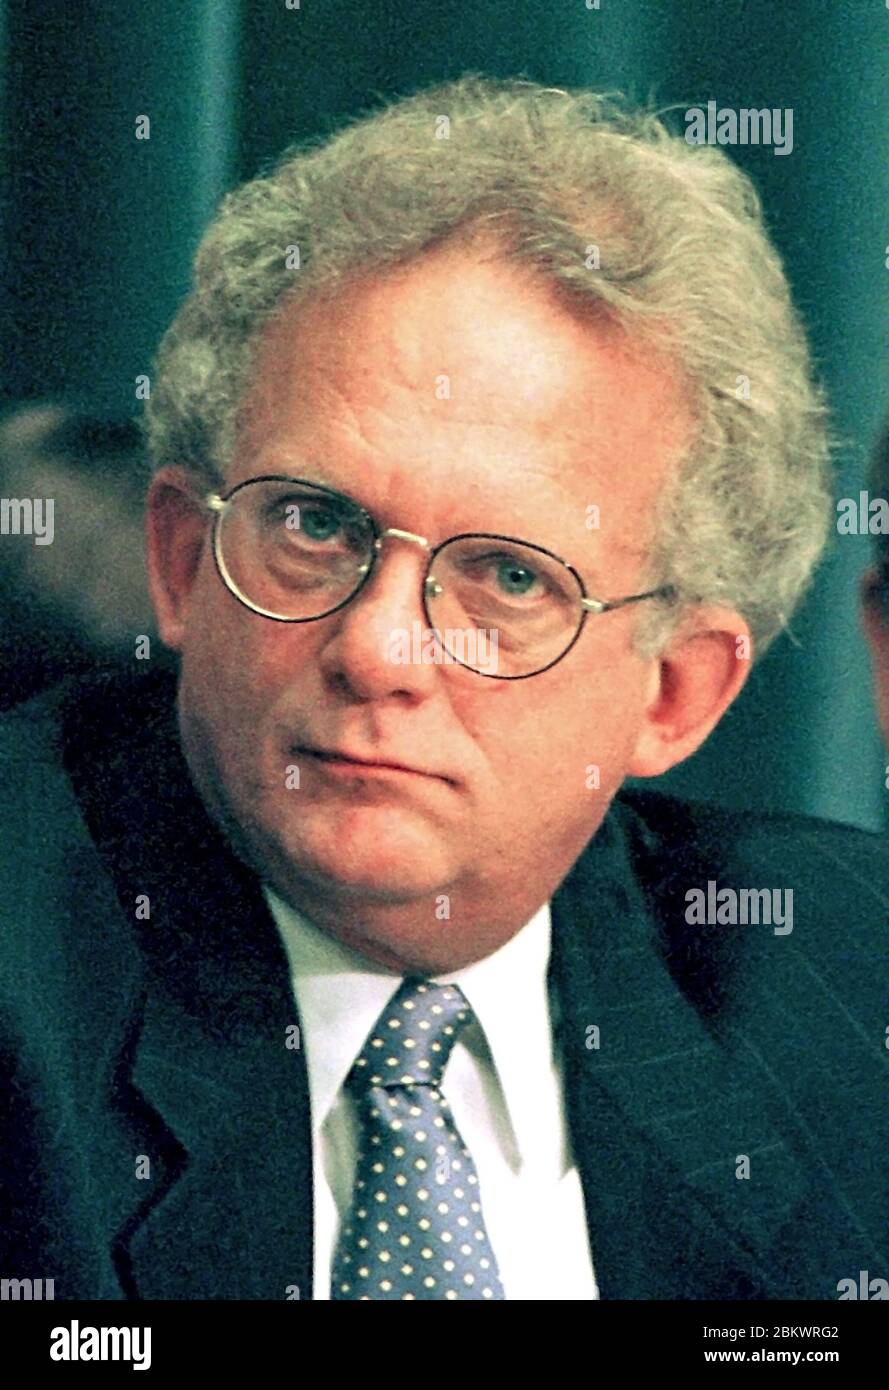 United States Representative Howard L. Berman (Democrat of California) makes his opening statements during the U.S. House Judiciary Committee hearing in Washington, DC to determine if there are to be Impeachment hearings against US President Bill Clinton on 5 October, 1998.Credit: Ron Sachs / CNP / MediaPunch Stock Photo